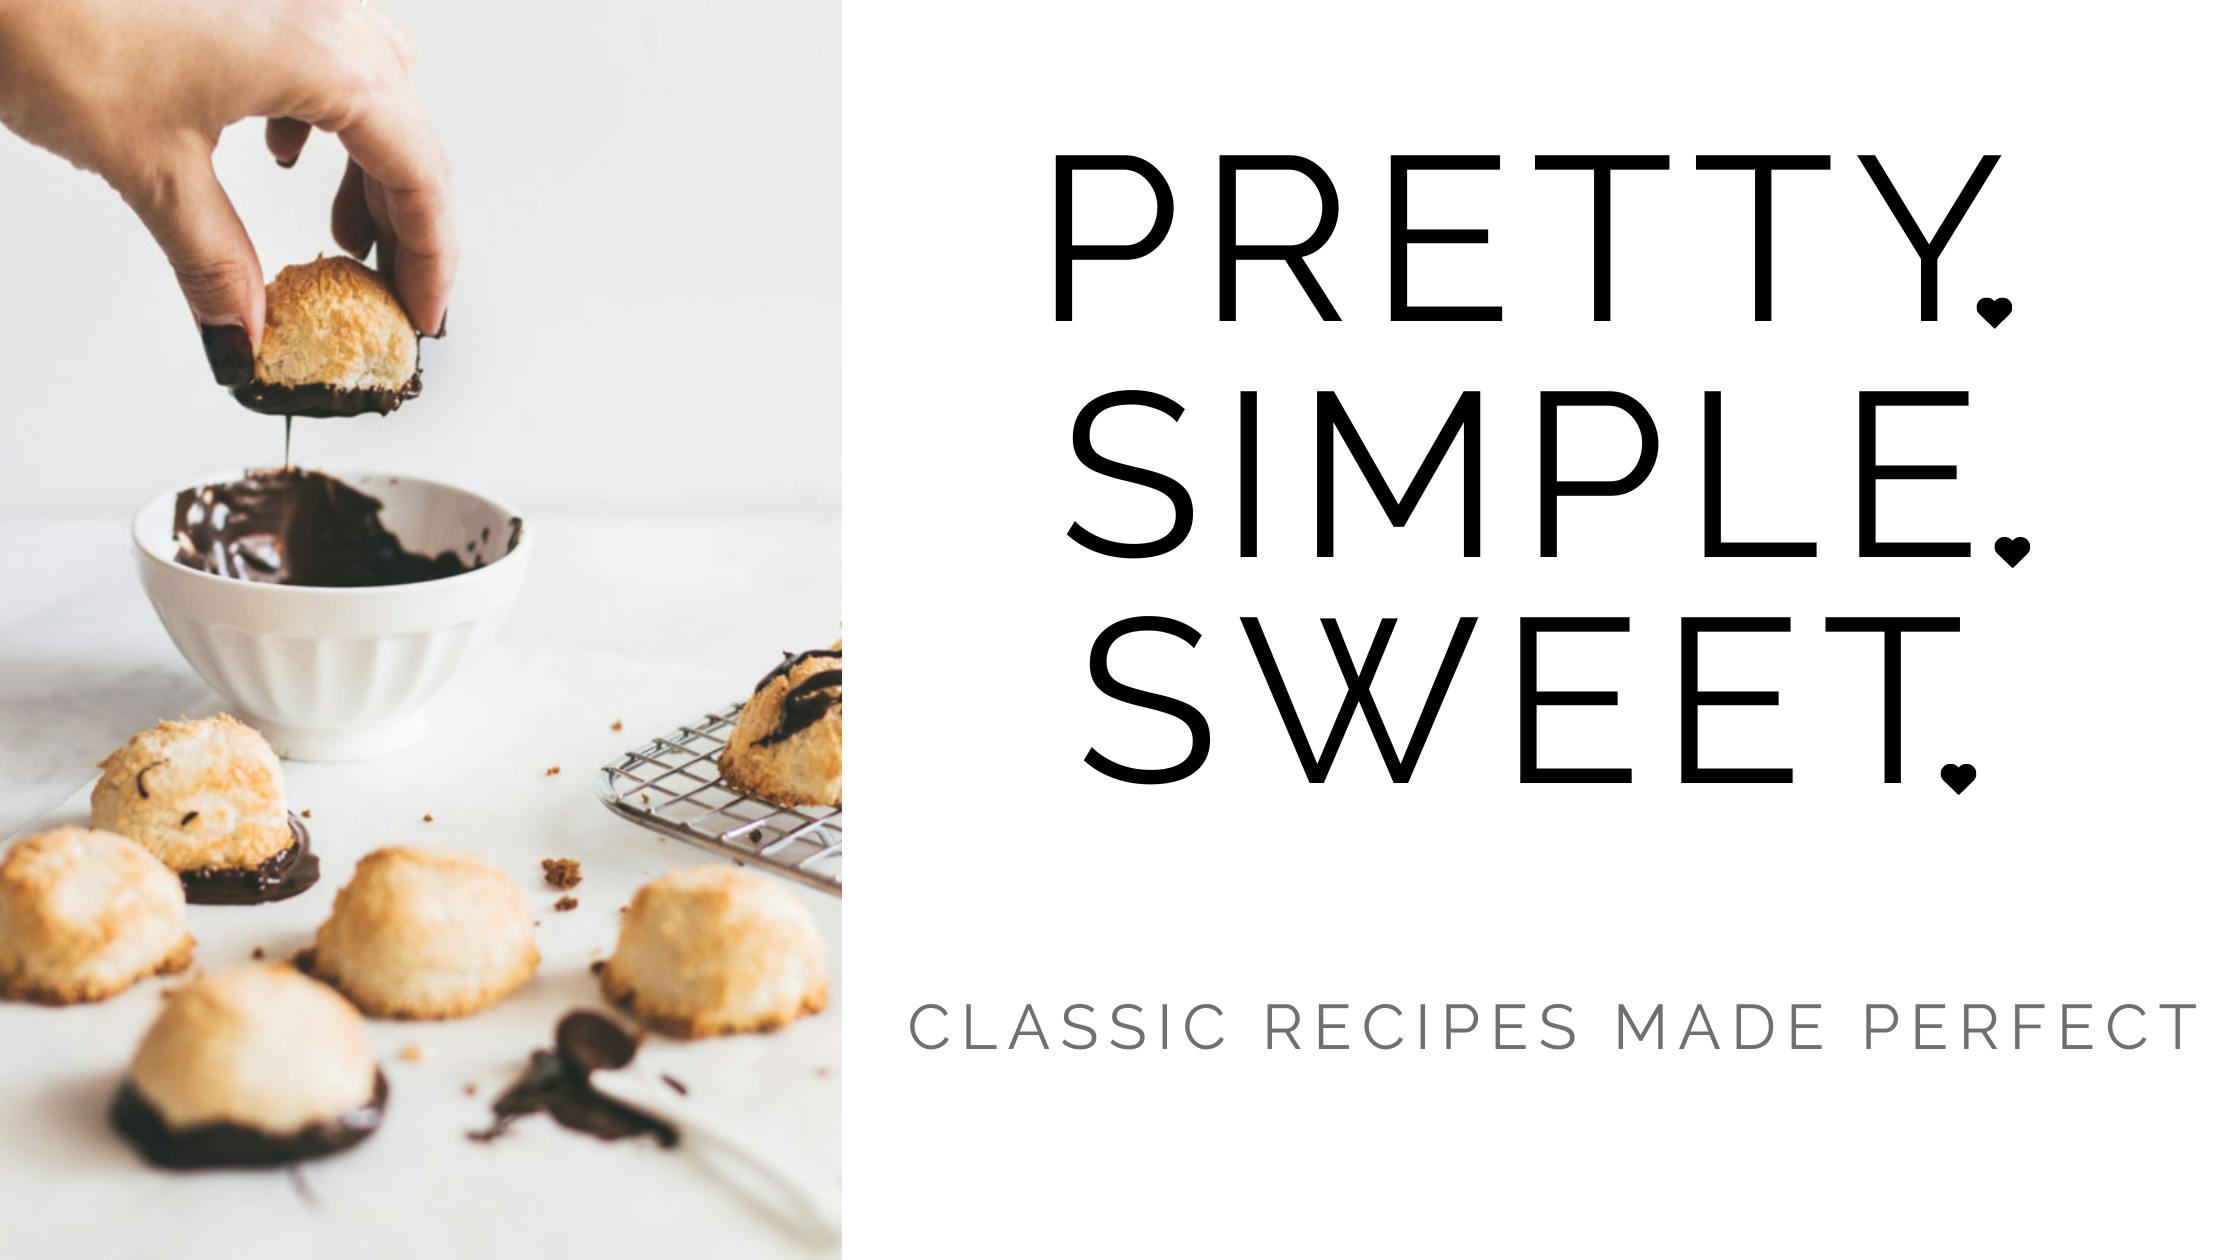 Pretty simple sweet, classic recipes made perfect.